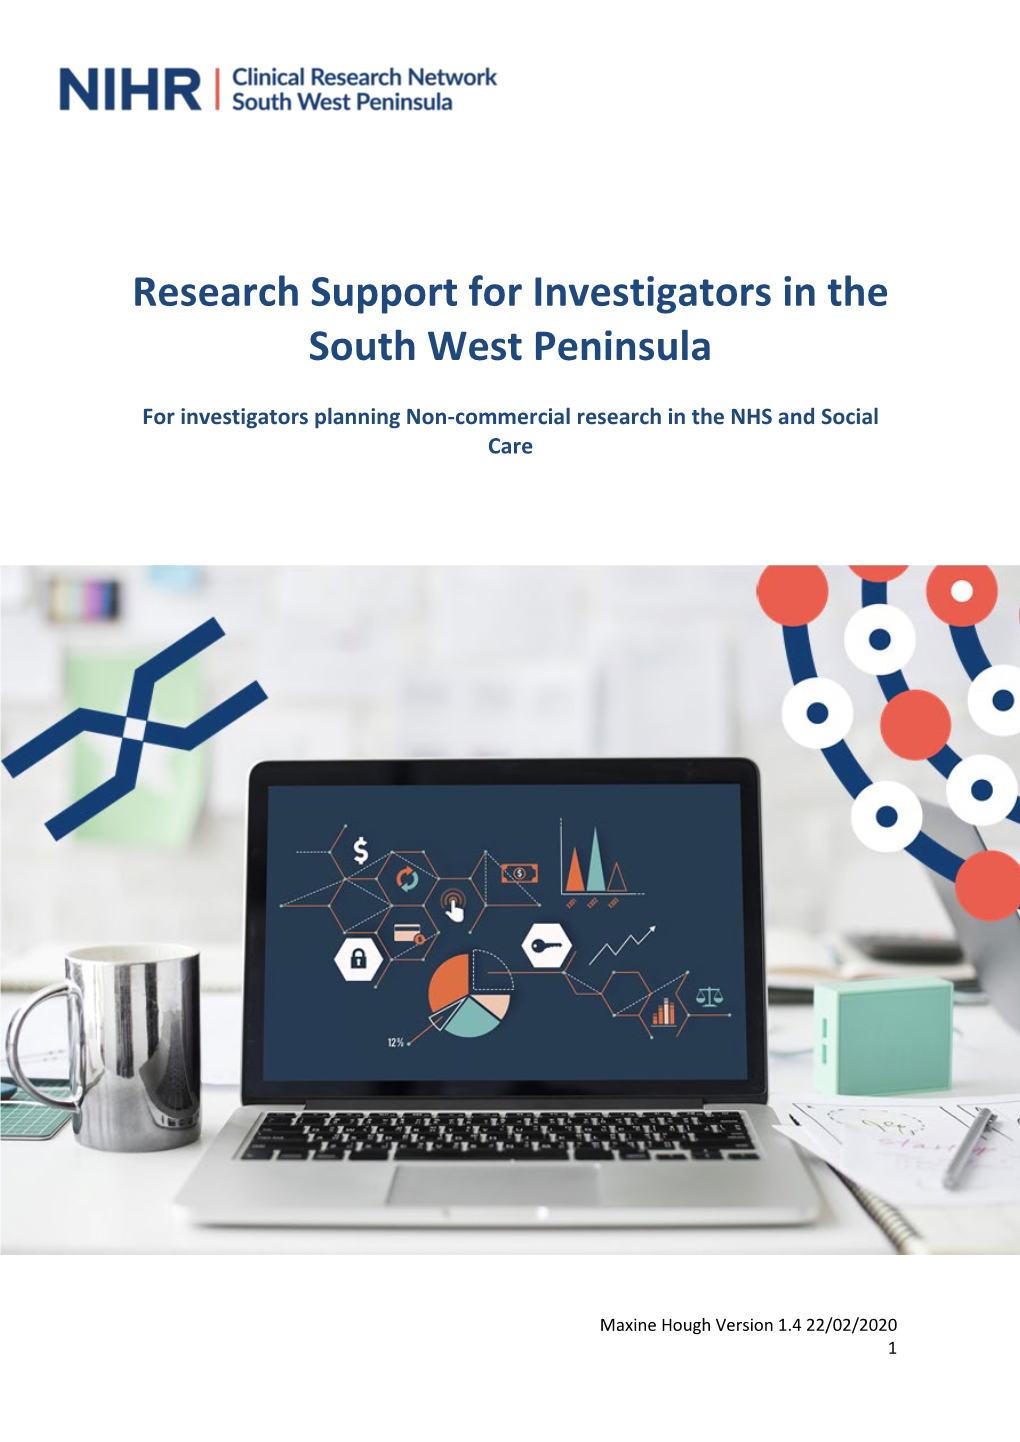 Research Support for Investigators in the South West Peninsula